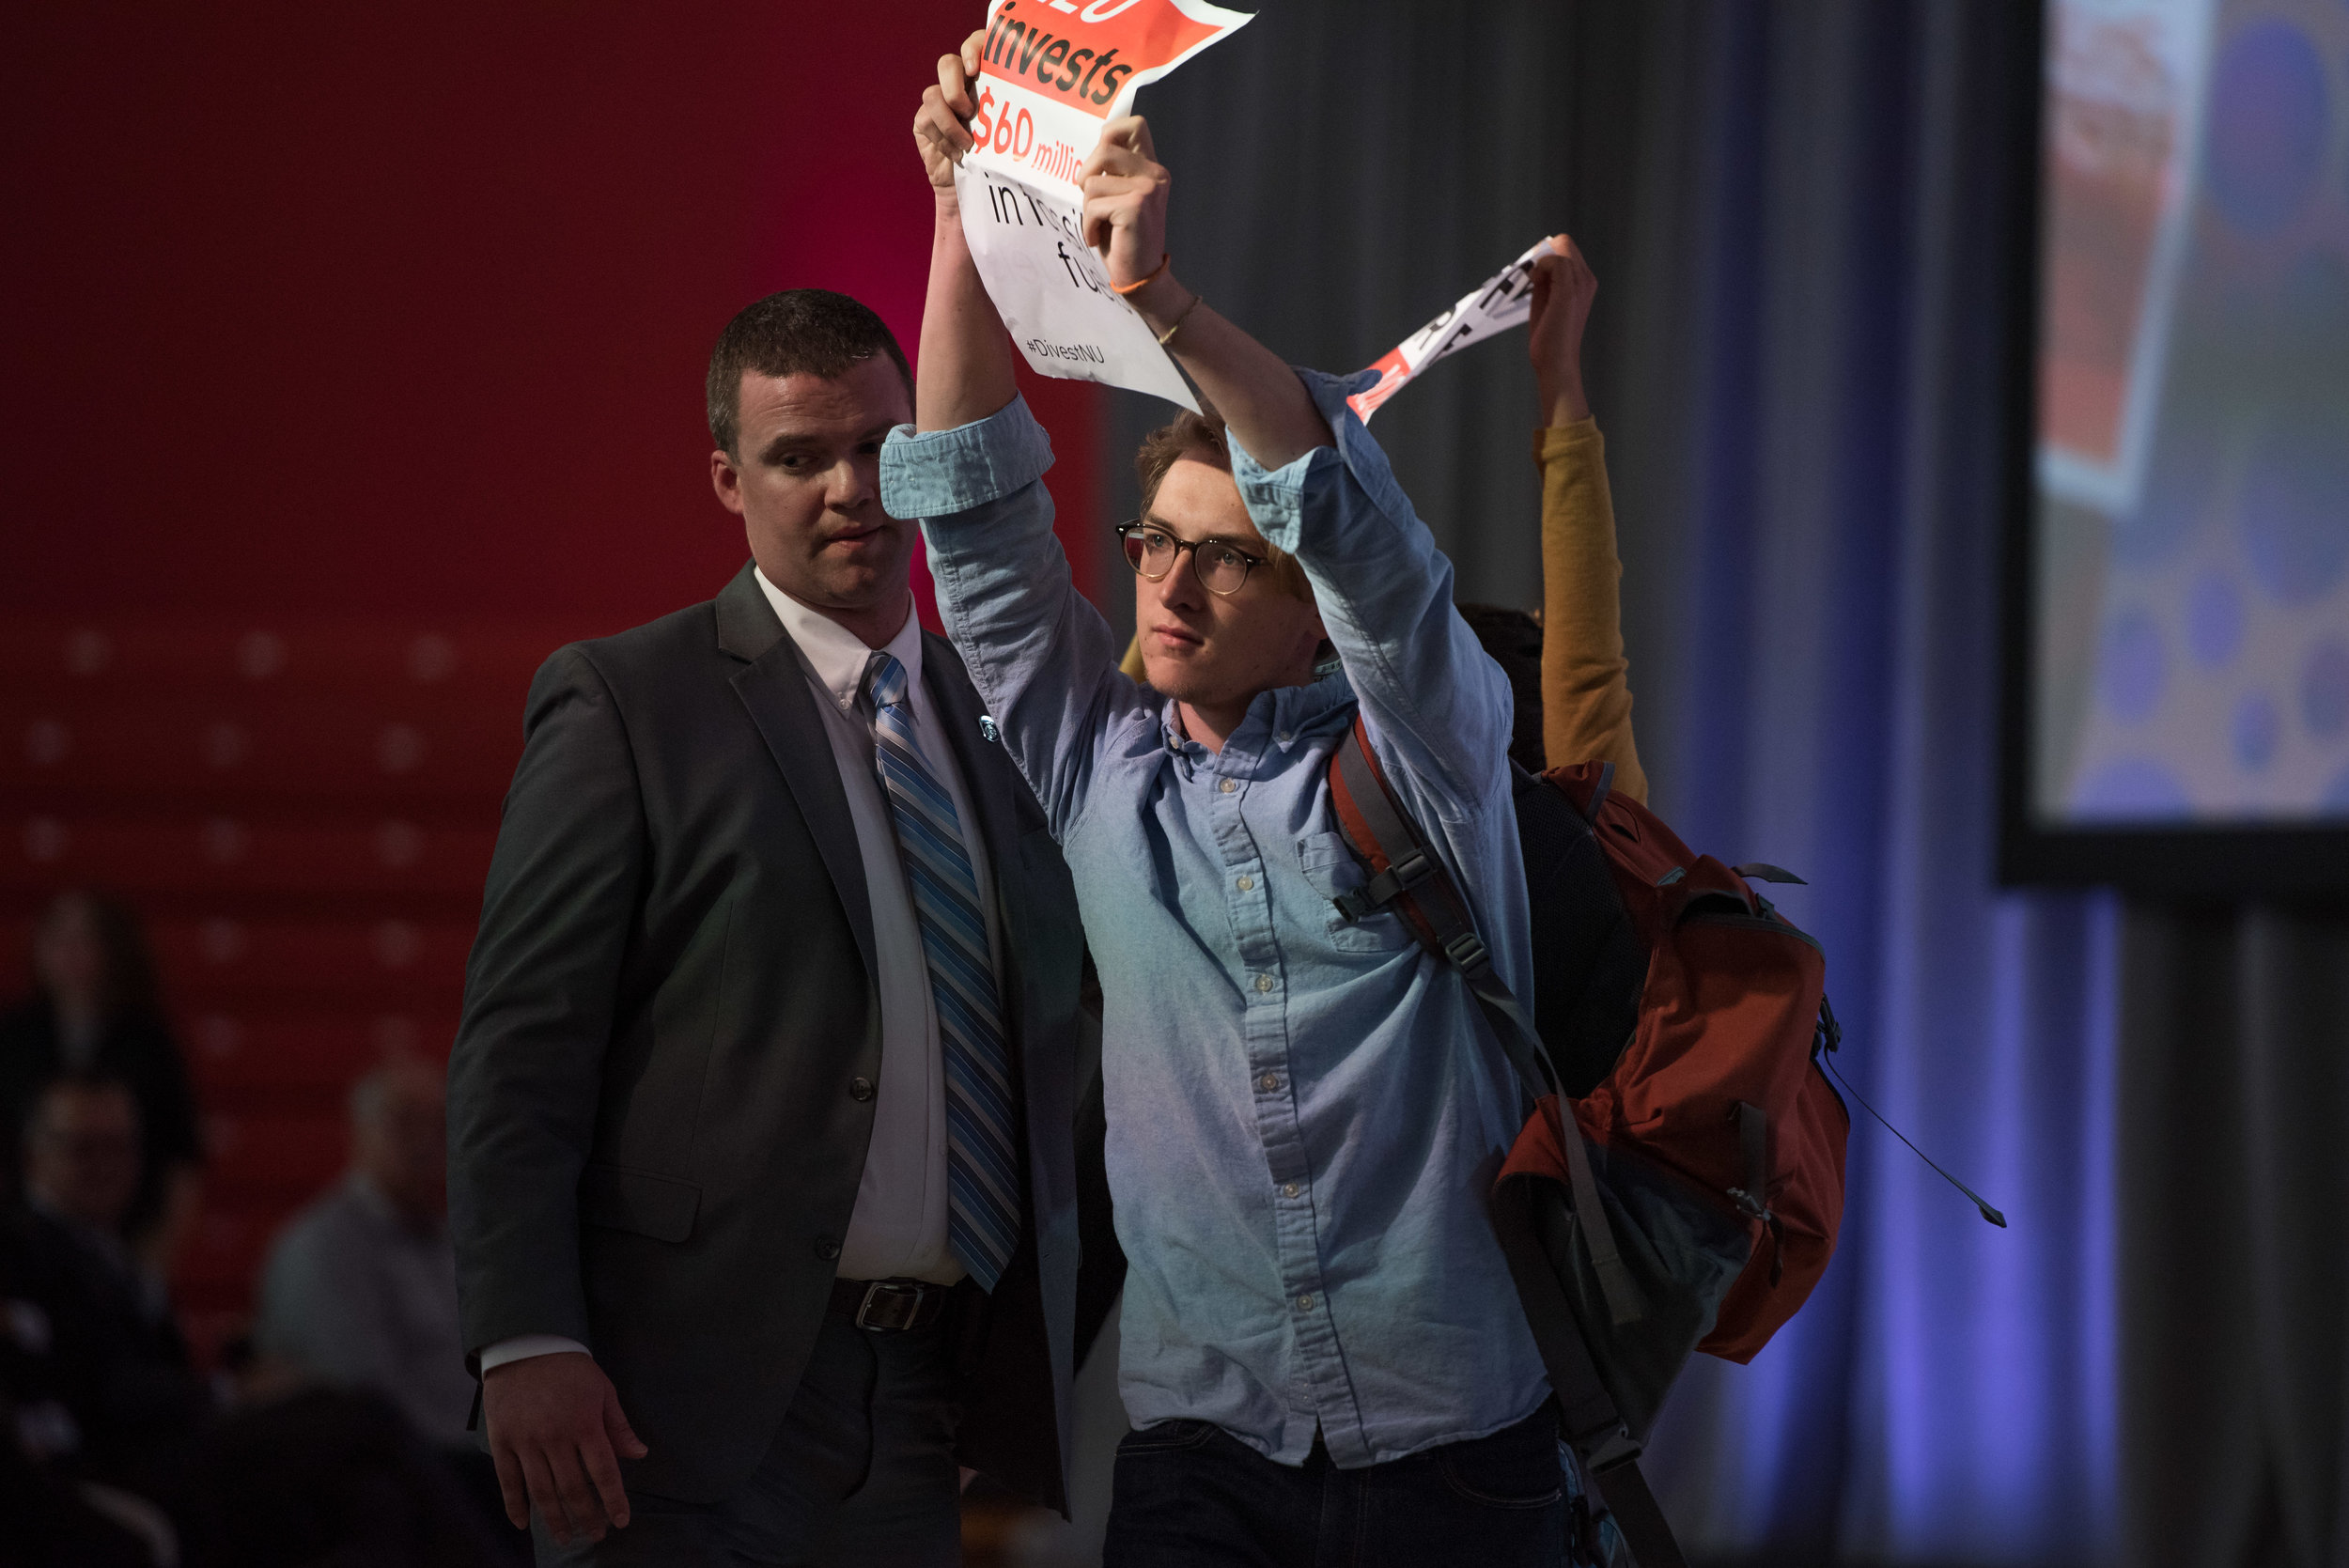  DIvestNU members James DeCunzo, in view, and Nebai Hernandez are escorted by security back to the audience after attempting to obscure camera views of the 2016 State of the University stage in Cabot Center on Thursday, Oct. 20.  "I knew security wou